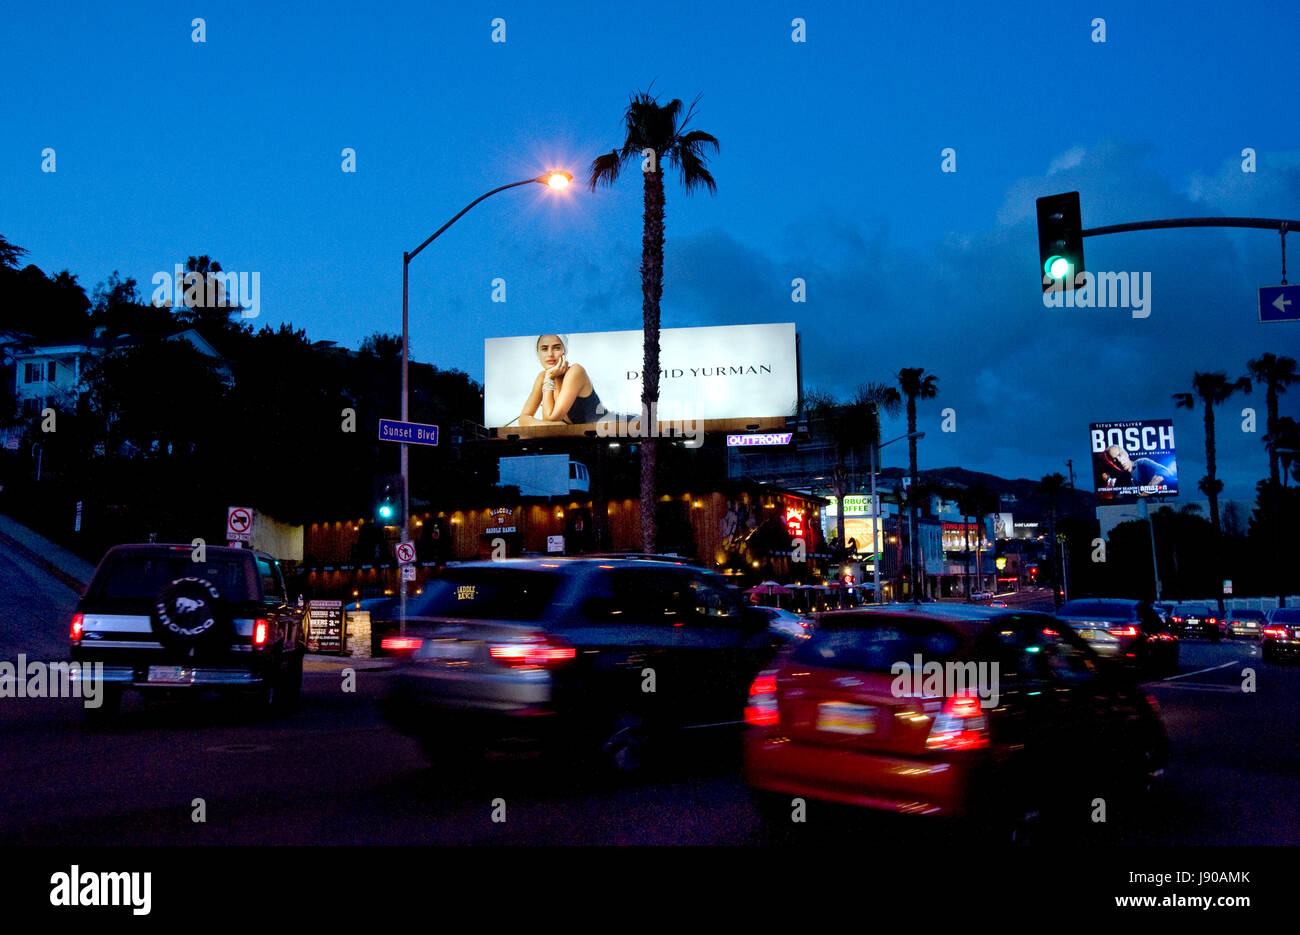 A fashion billboard lit up at dusk over traffic on the Sunset Strip in the west Hollywood neighborhood of Los Angeles, CA Stock Photo